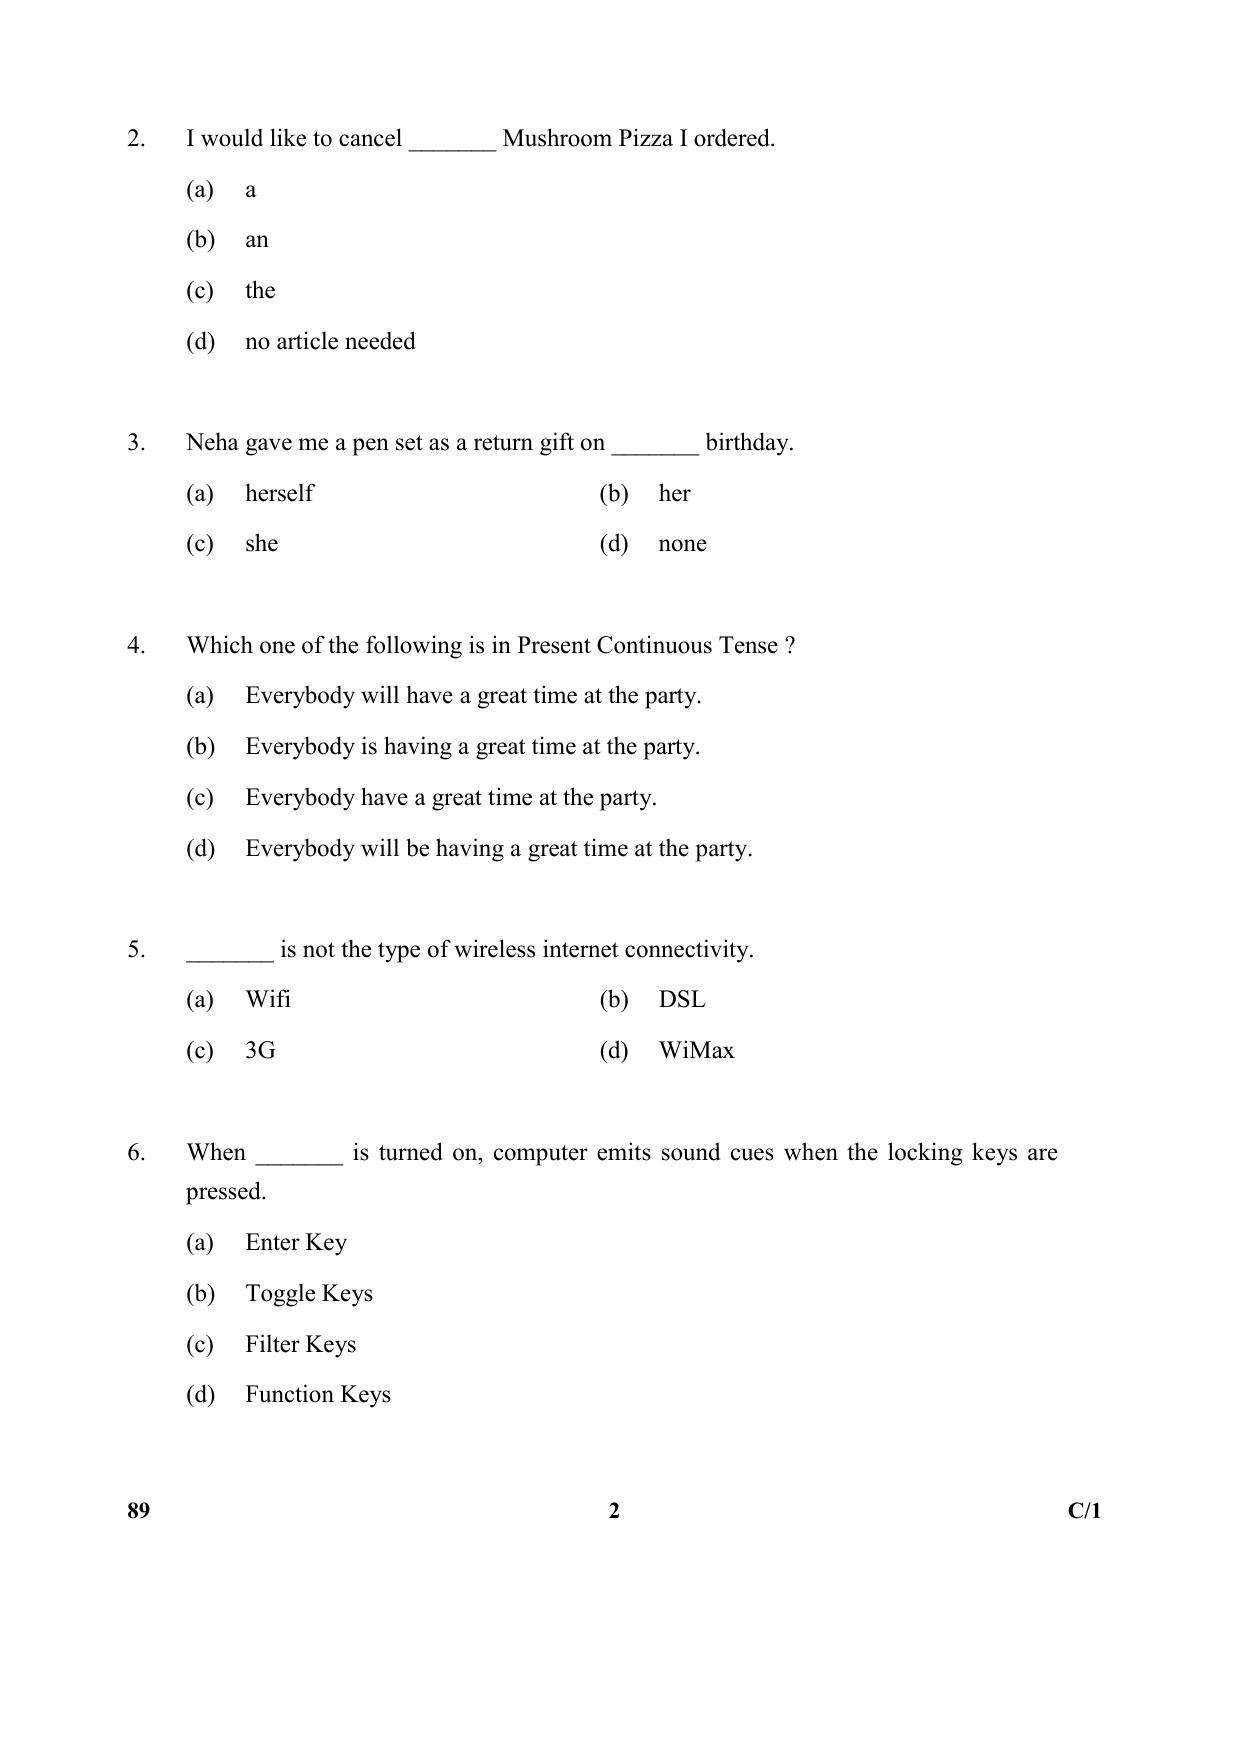 CBSE Class 10 89 (Information Technology) 2018 Compartment Question Paper - Page 2